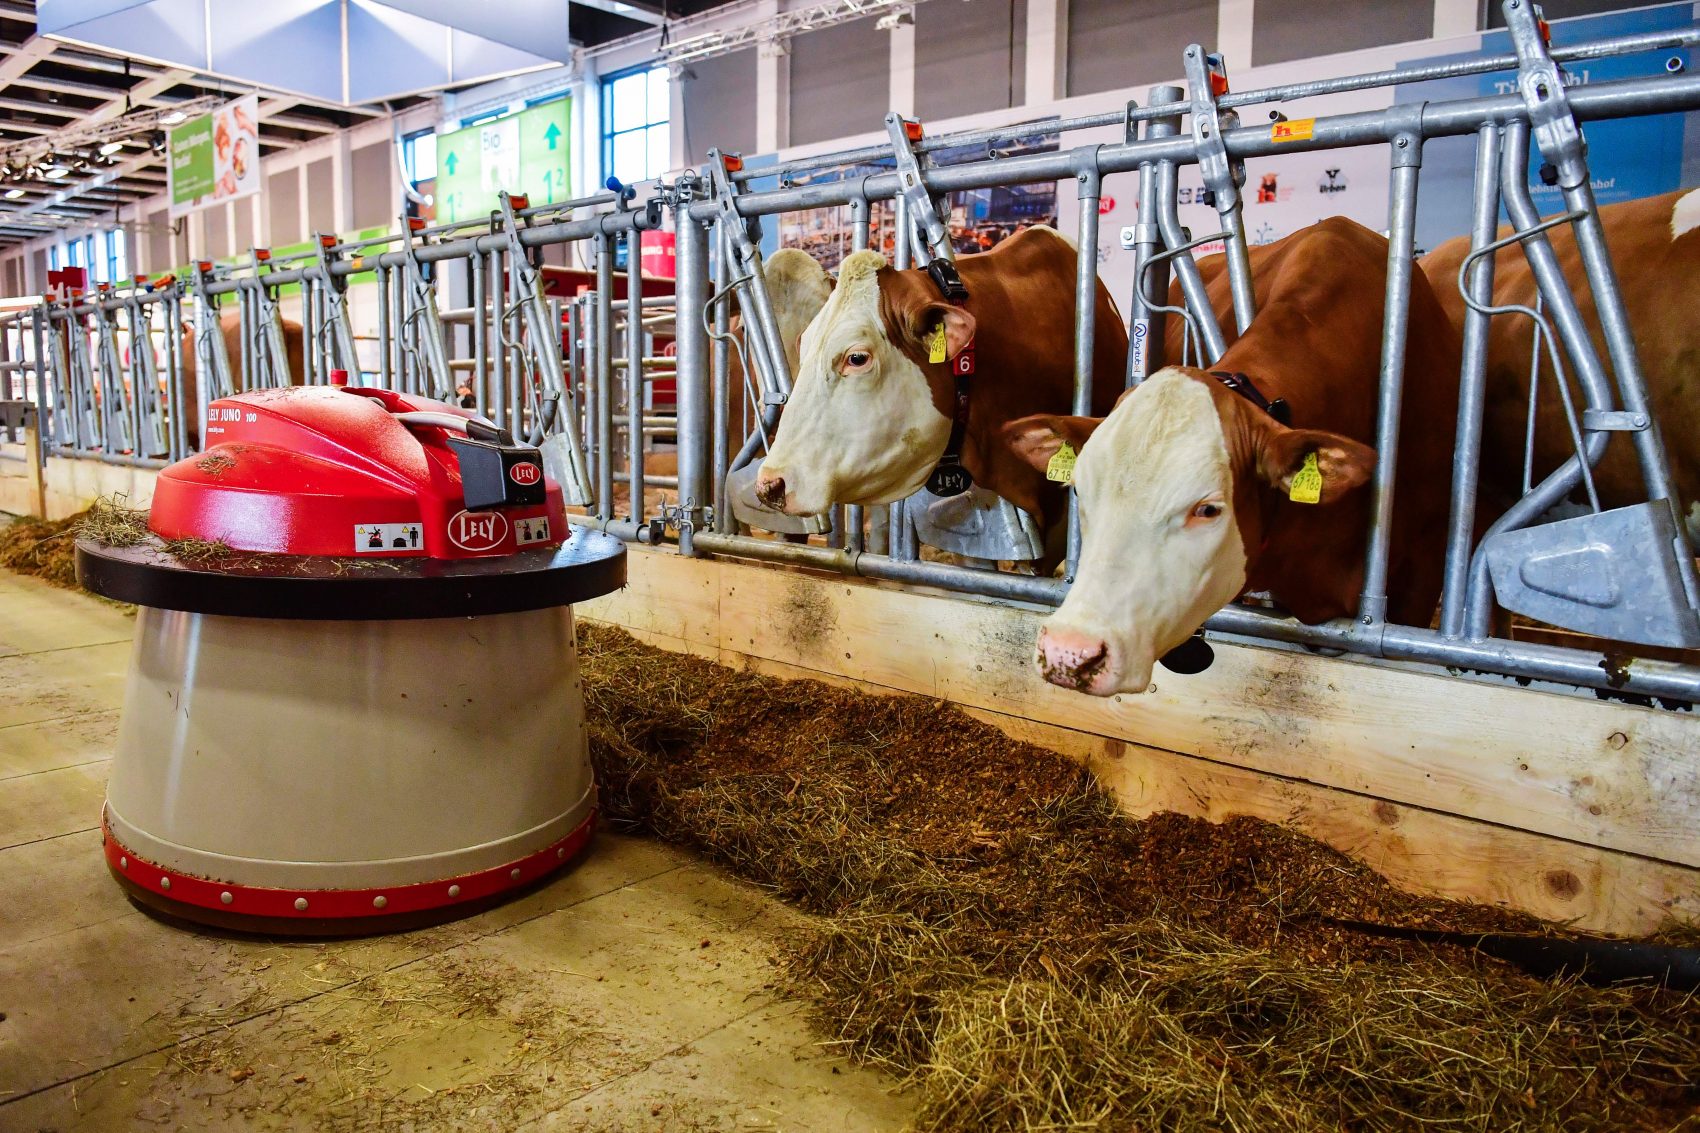 Robotic Milking: How Does It Helps In Dairy Farming?